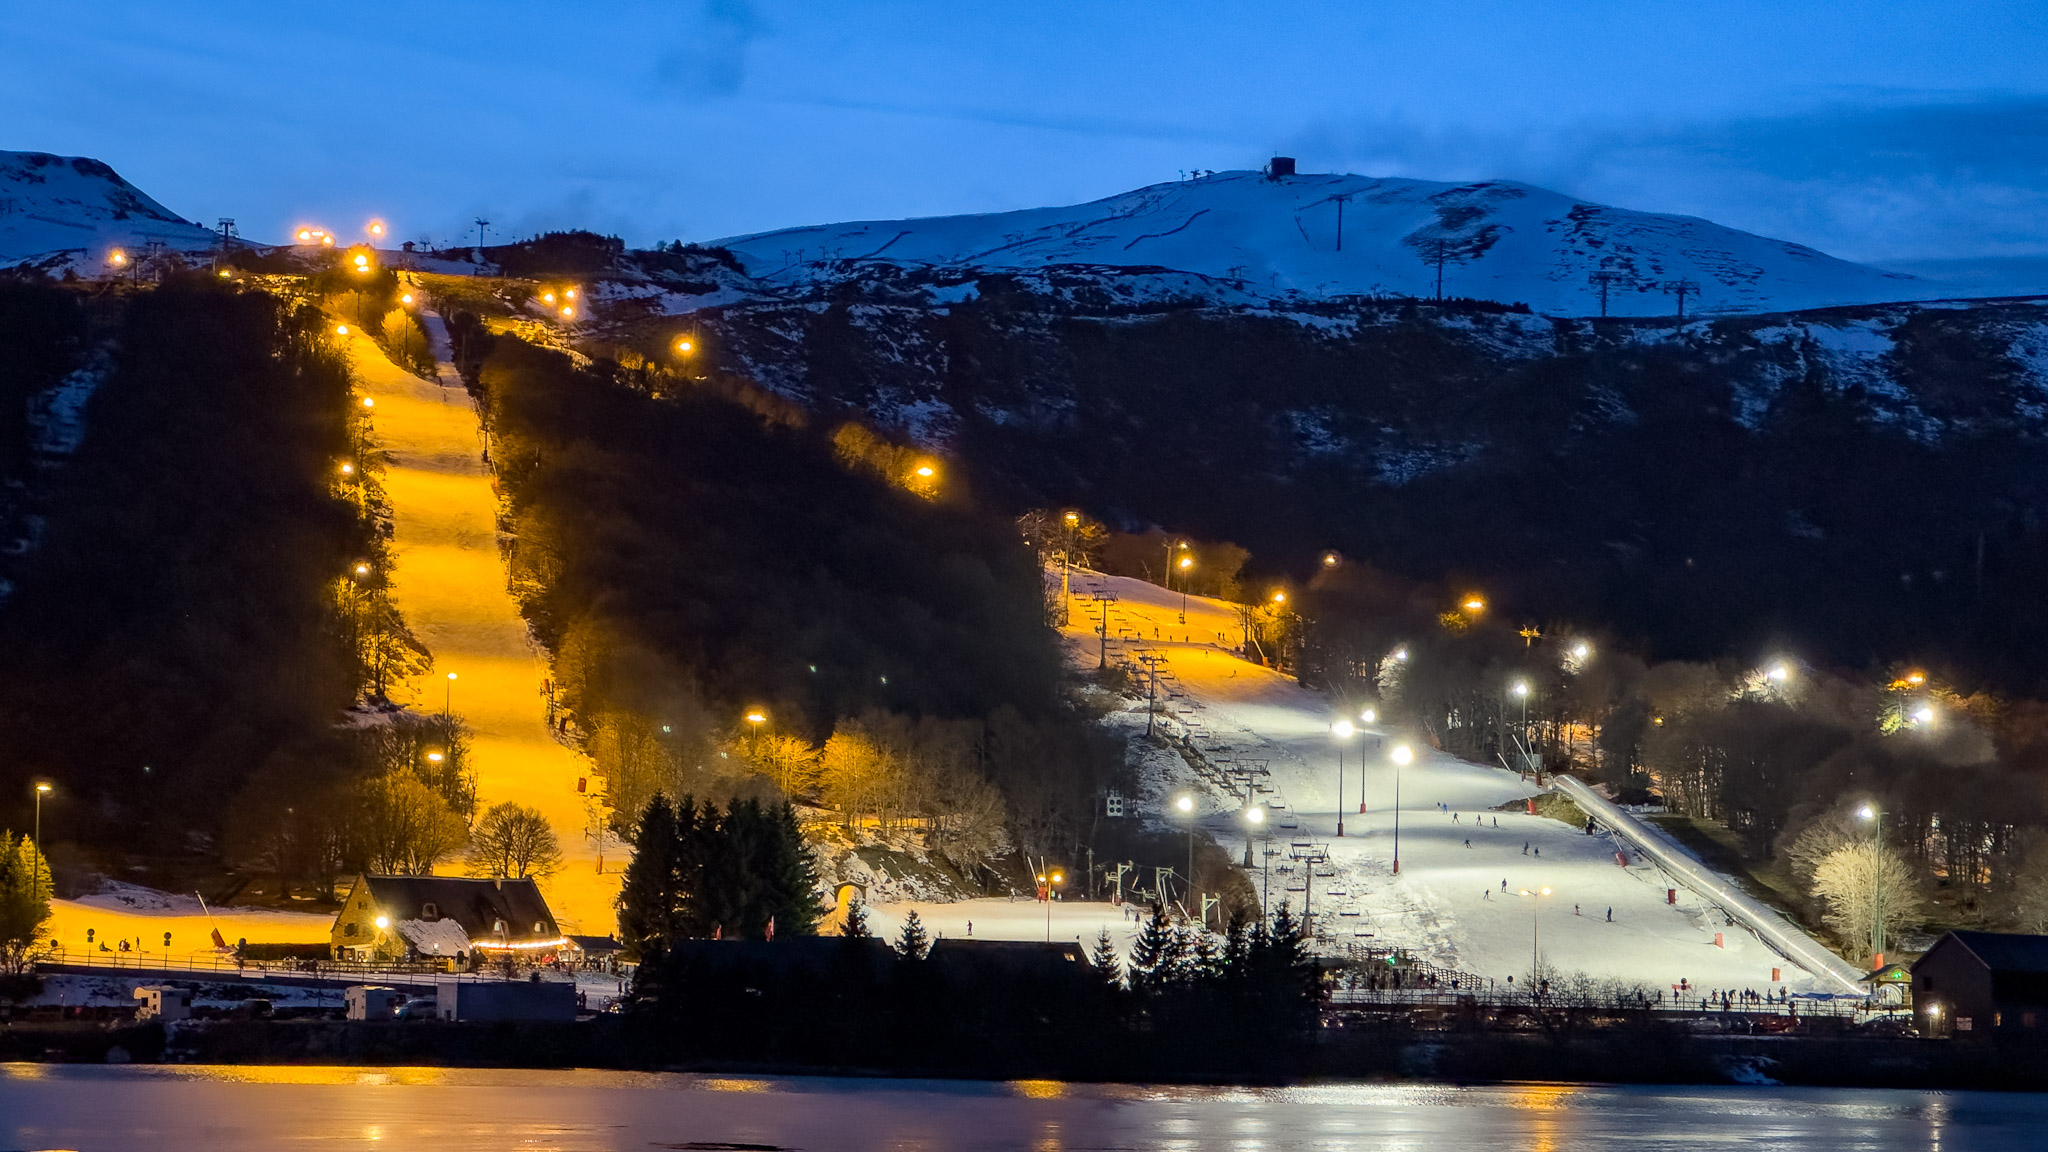 Super Besse, skiing on the slopes of Super Besse at night